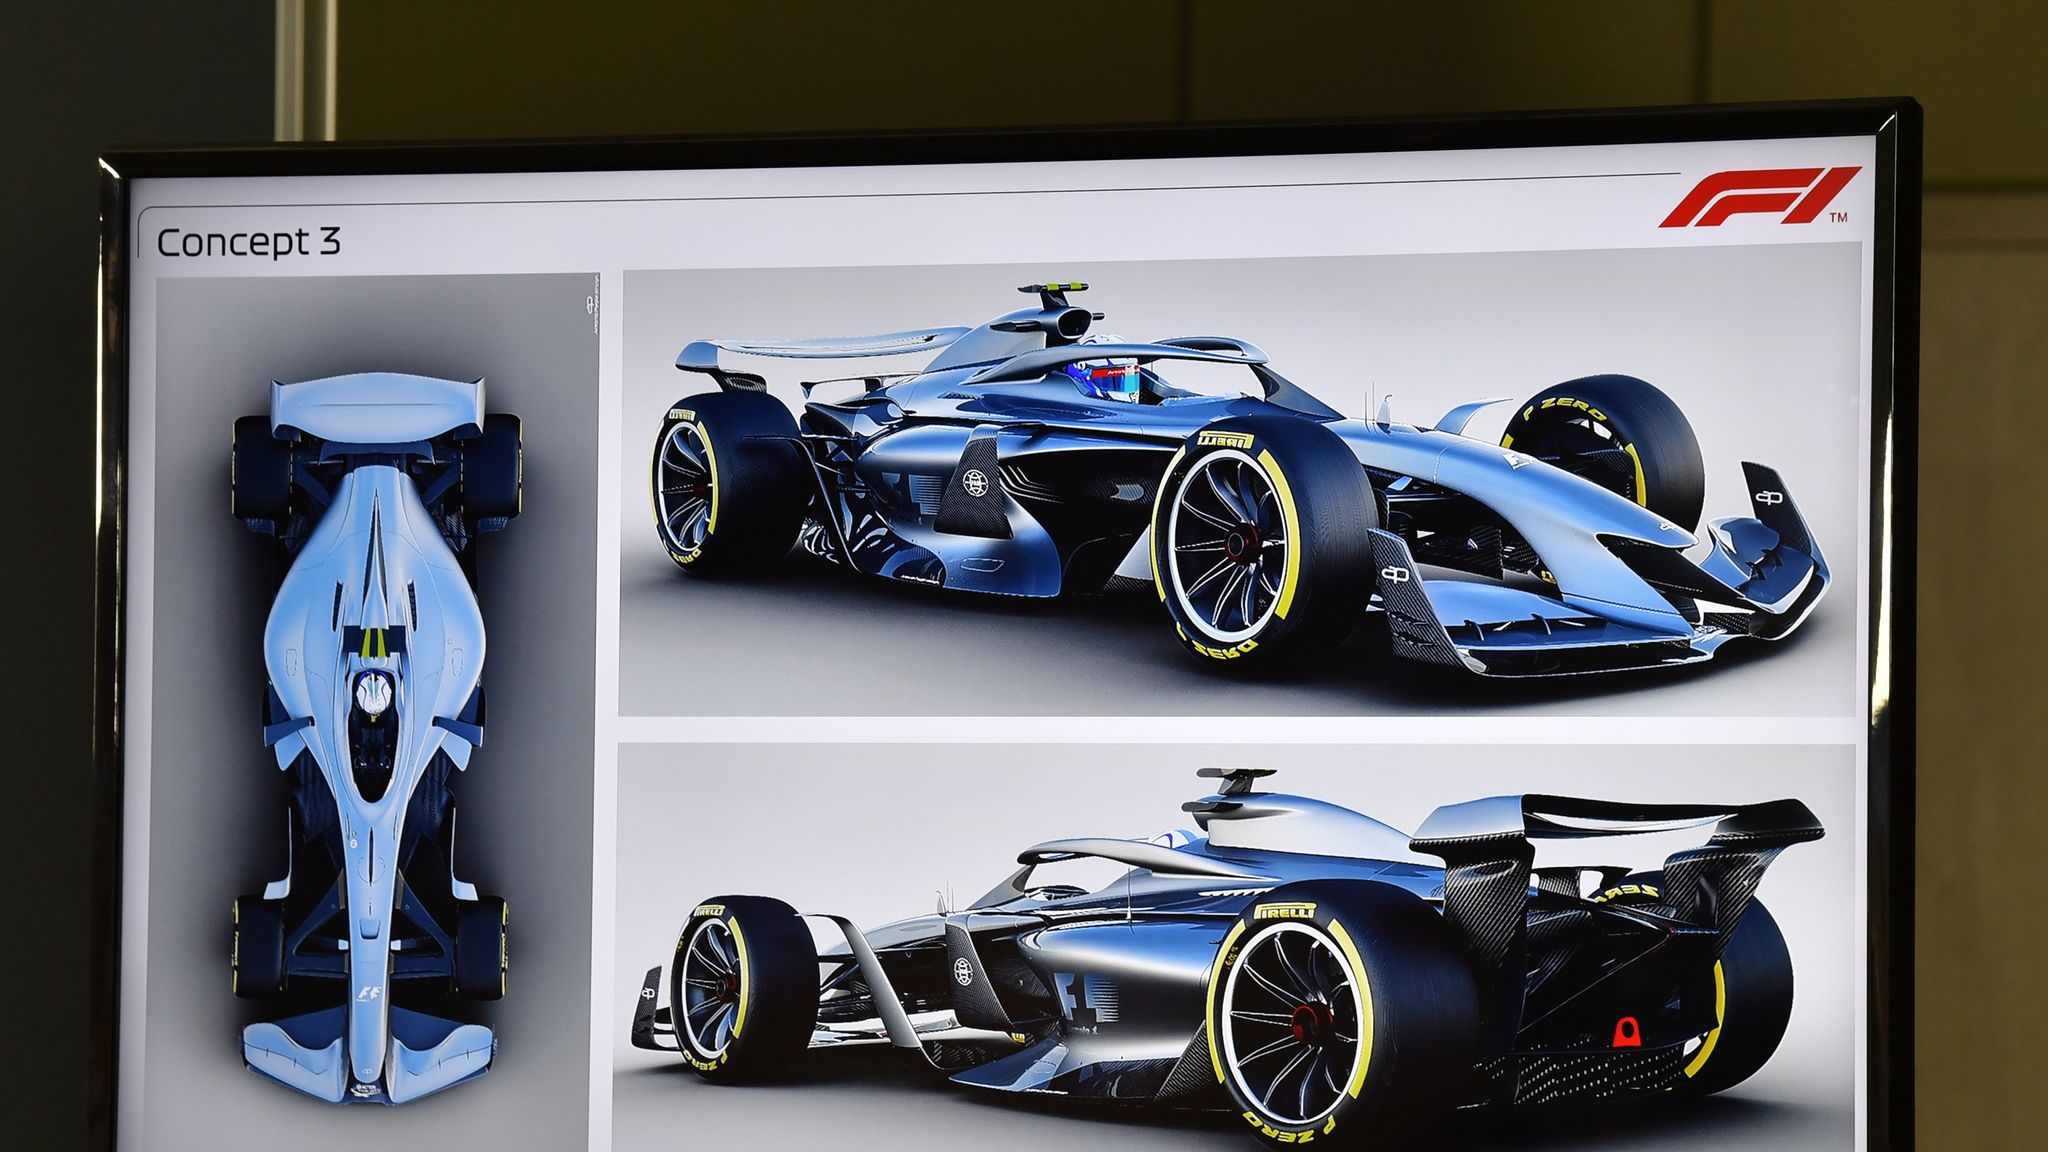 F1 reveals 2021 concept cars with aim to improve racing F1 News